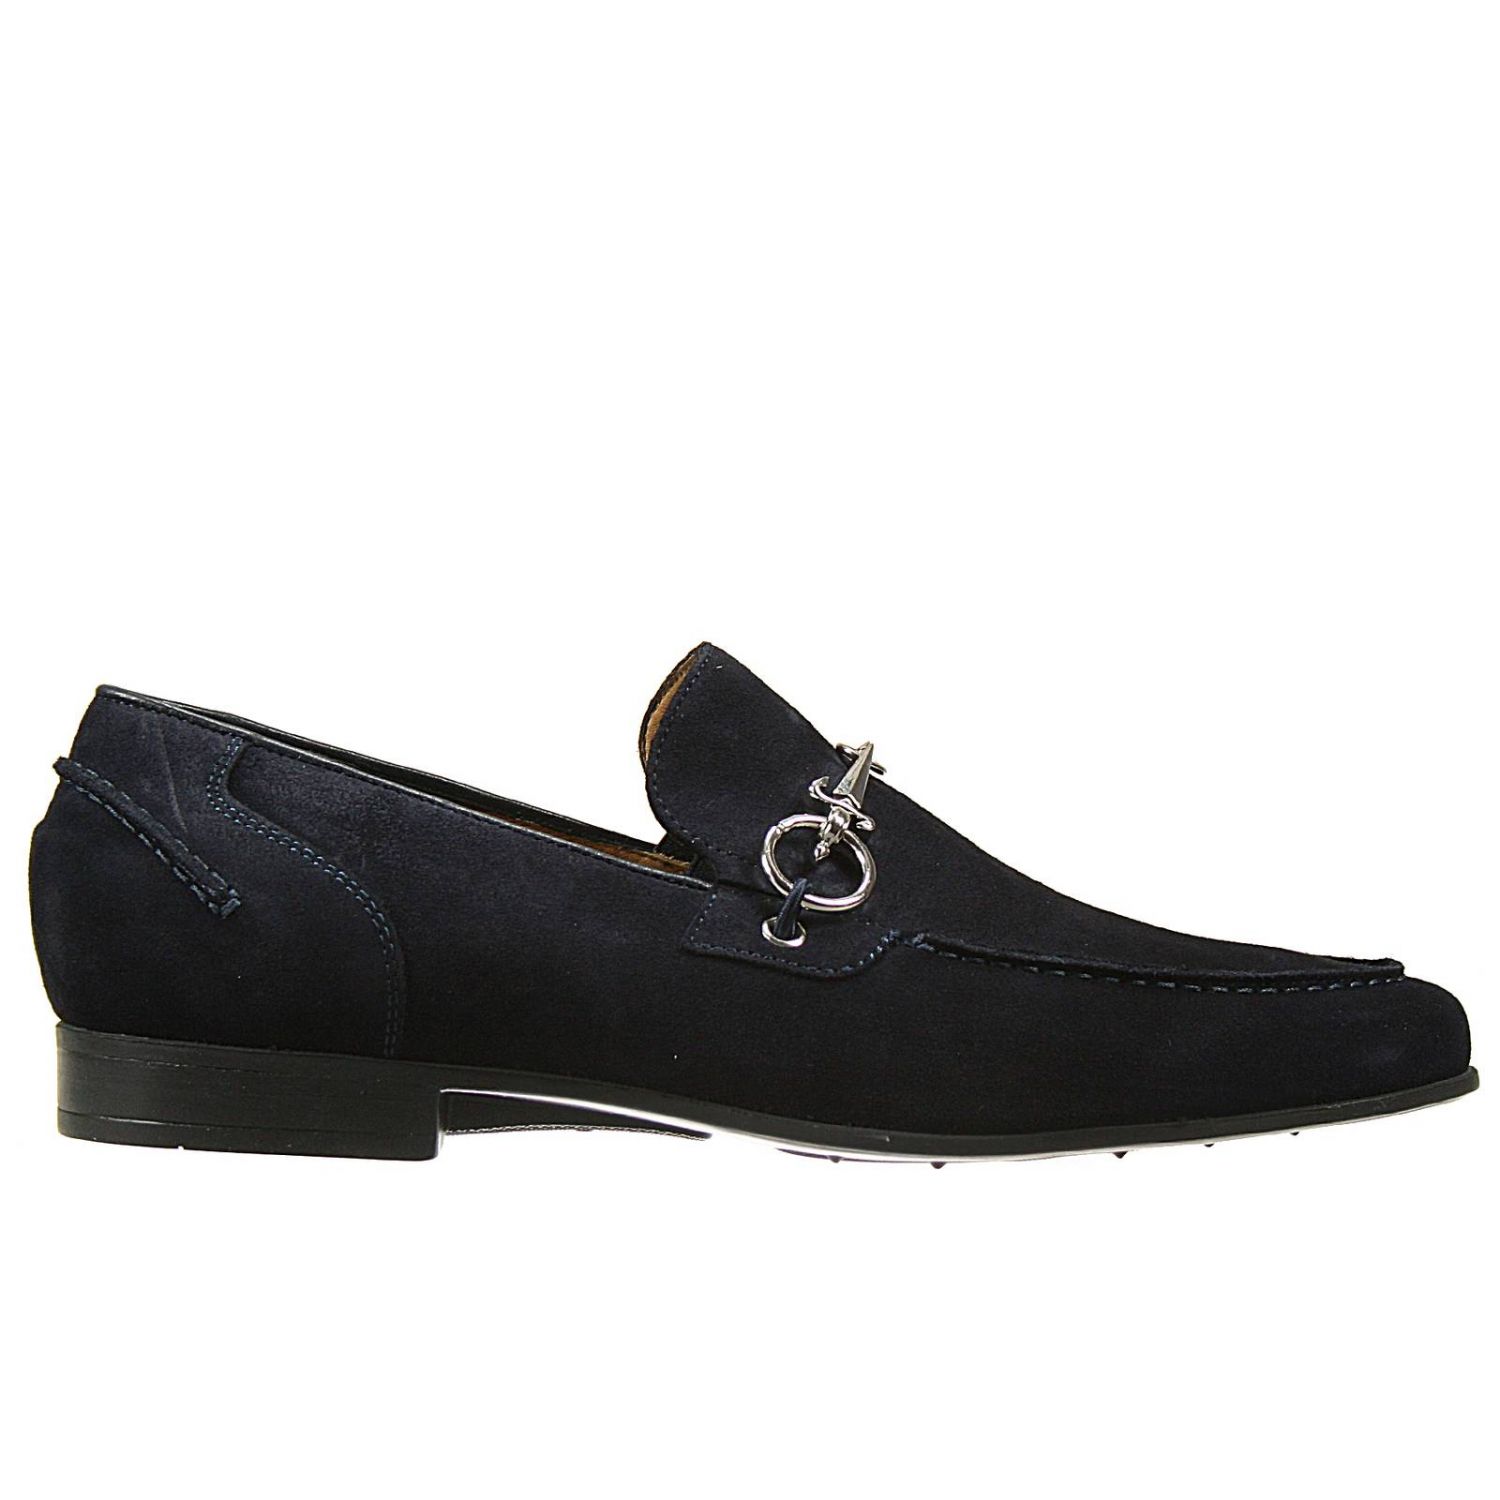 Paciotti 4Us Outlet: shoes loafer or penny loafer suede with horsebit ...